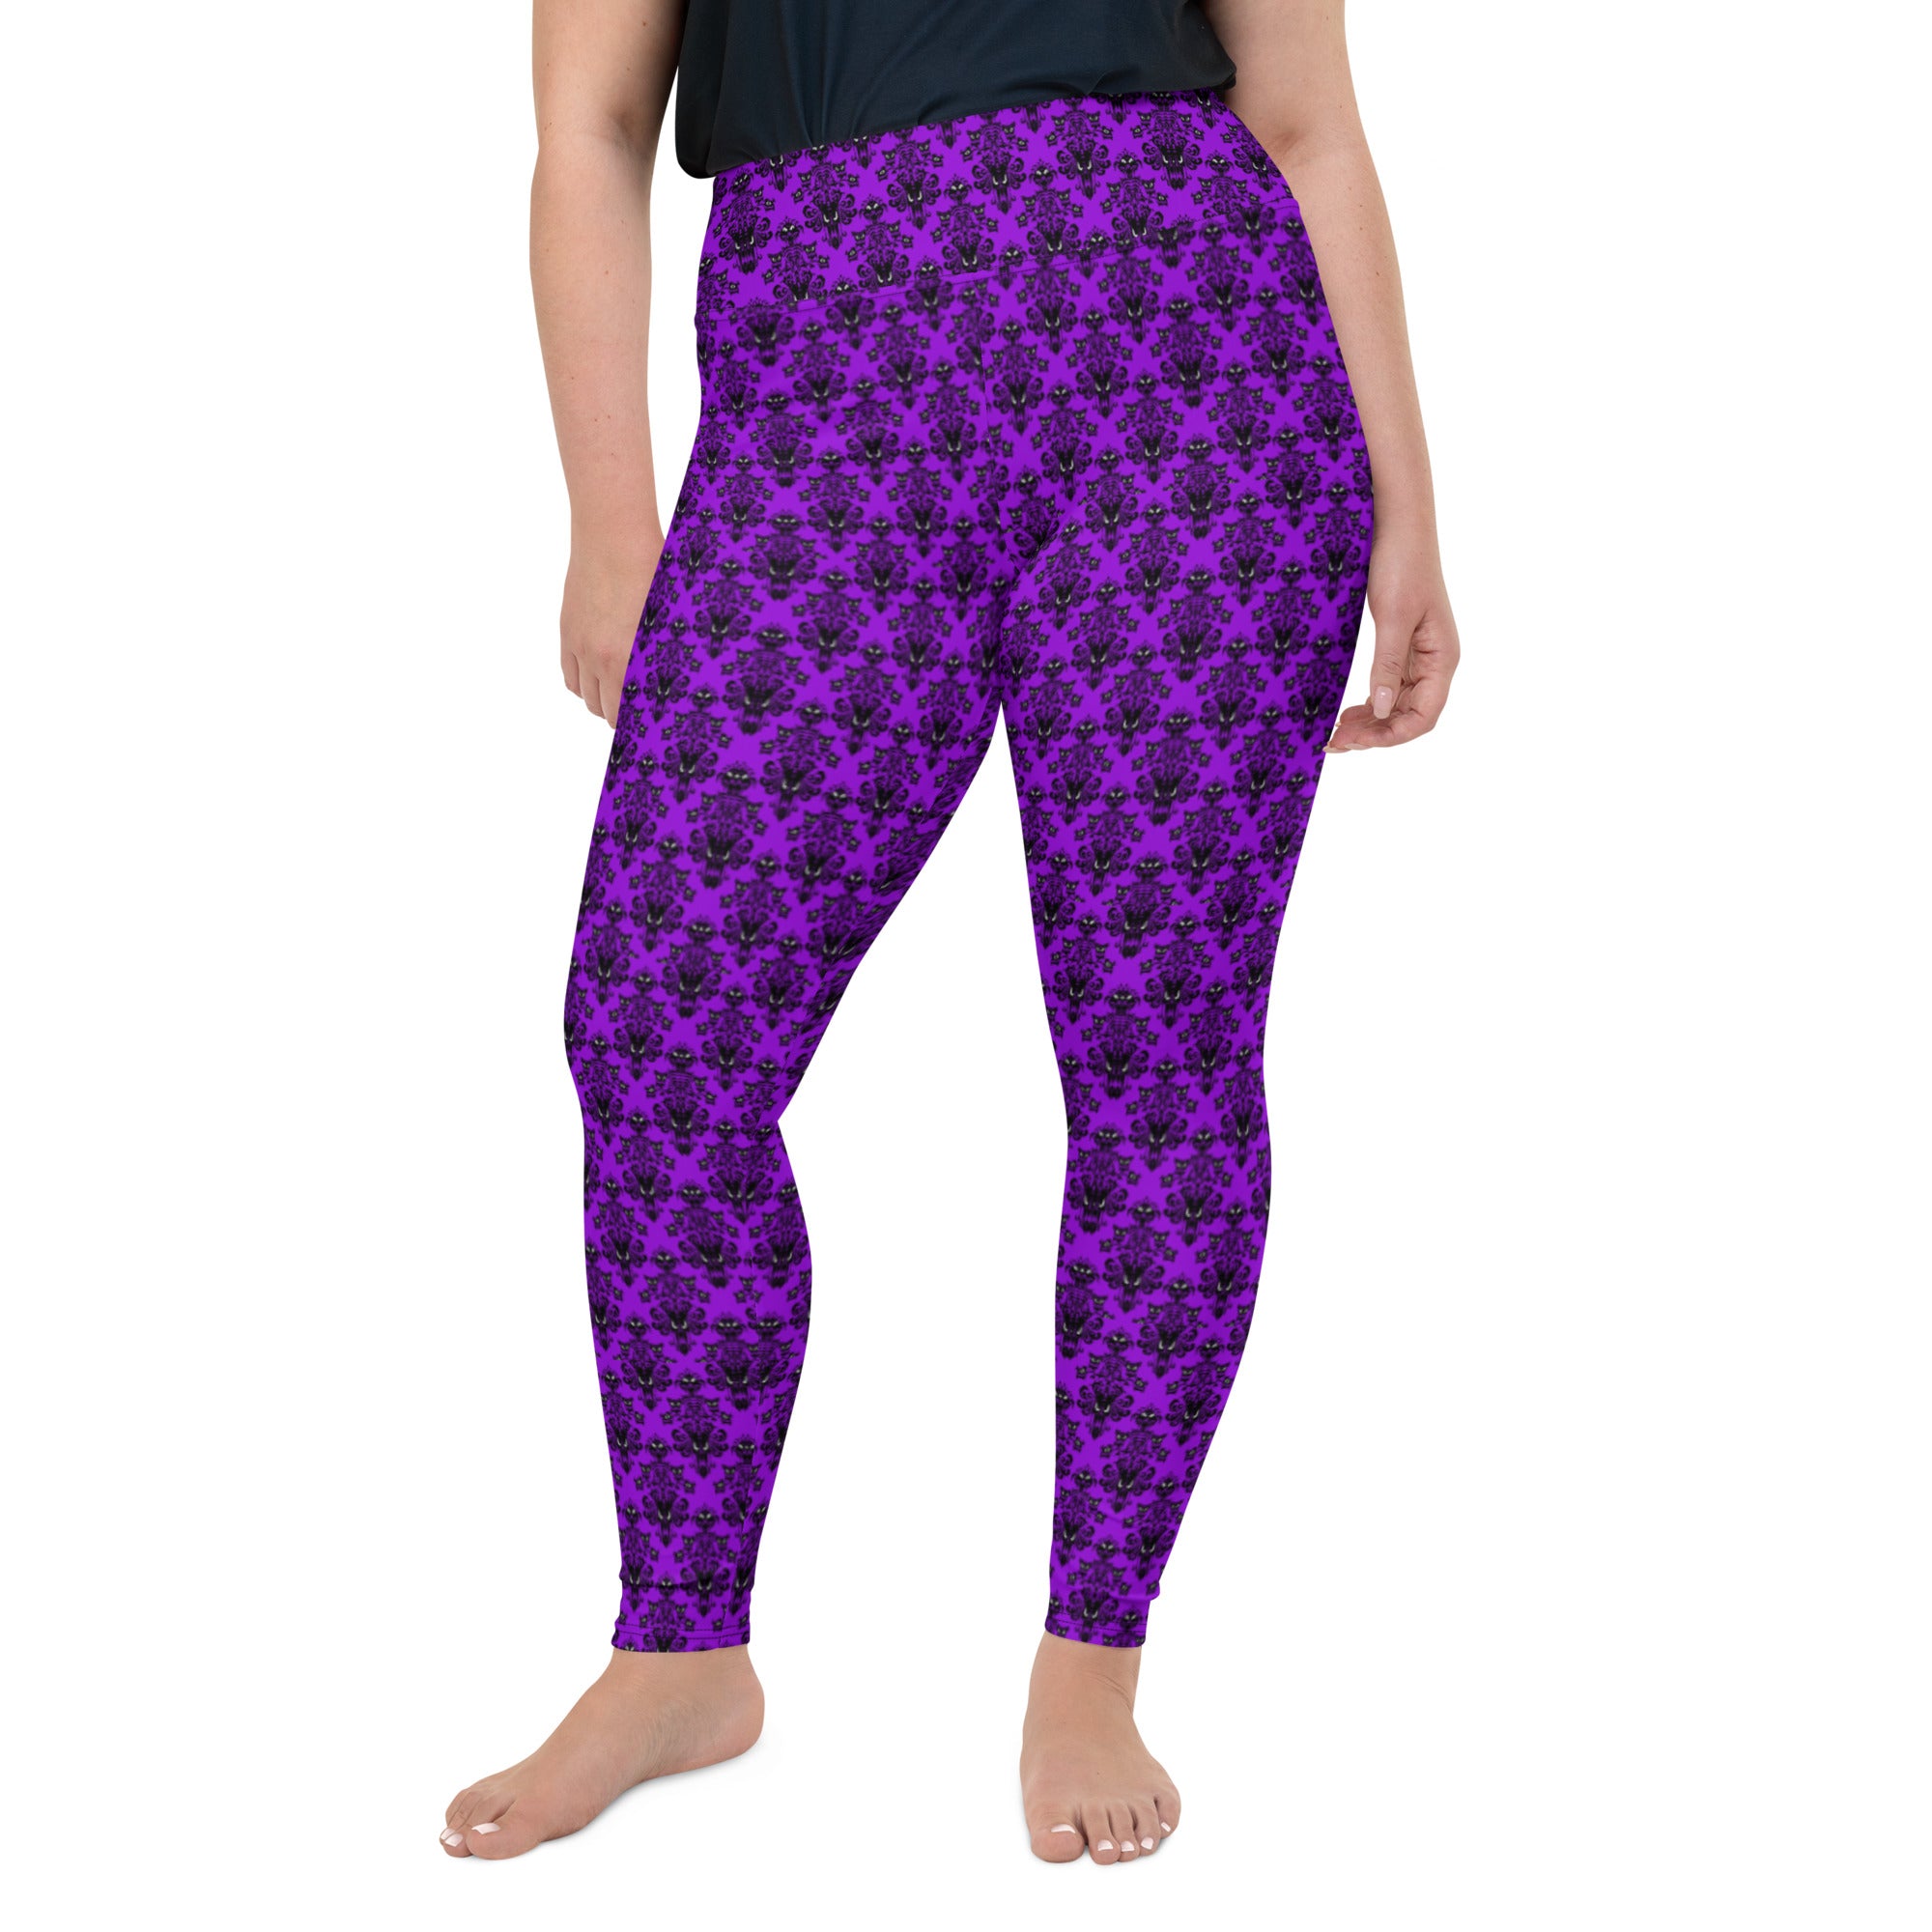 Plus Size Purple Gothic Haunted Mansion Style All-Over Print Leggings Halloween Pattern - Edge of Life Designs